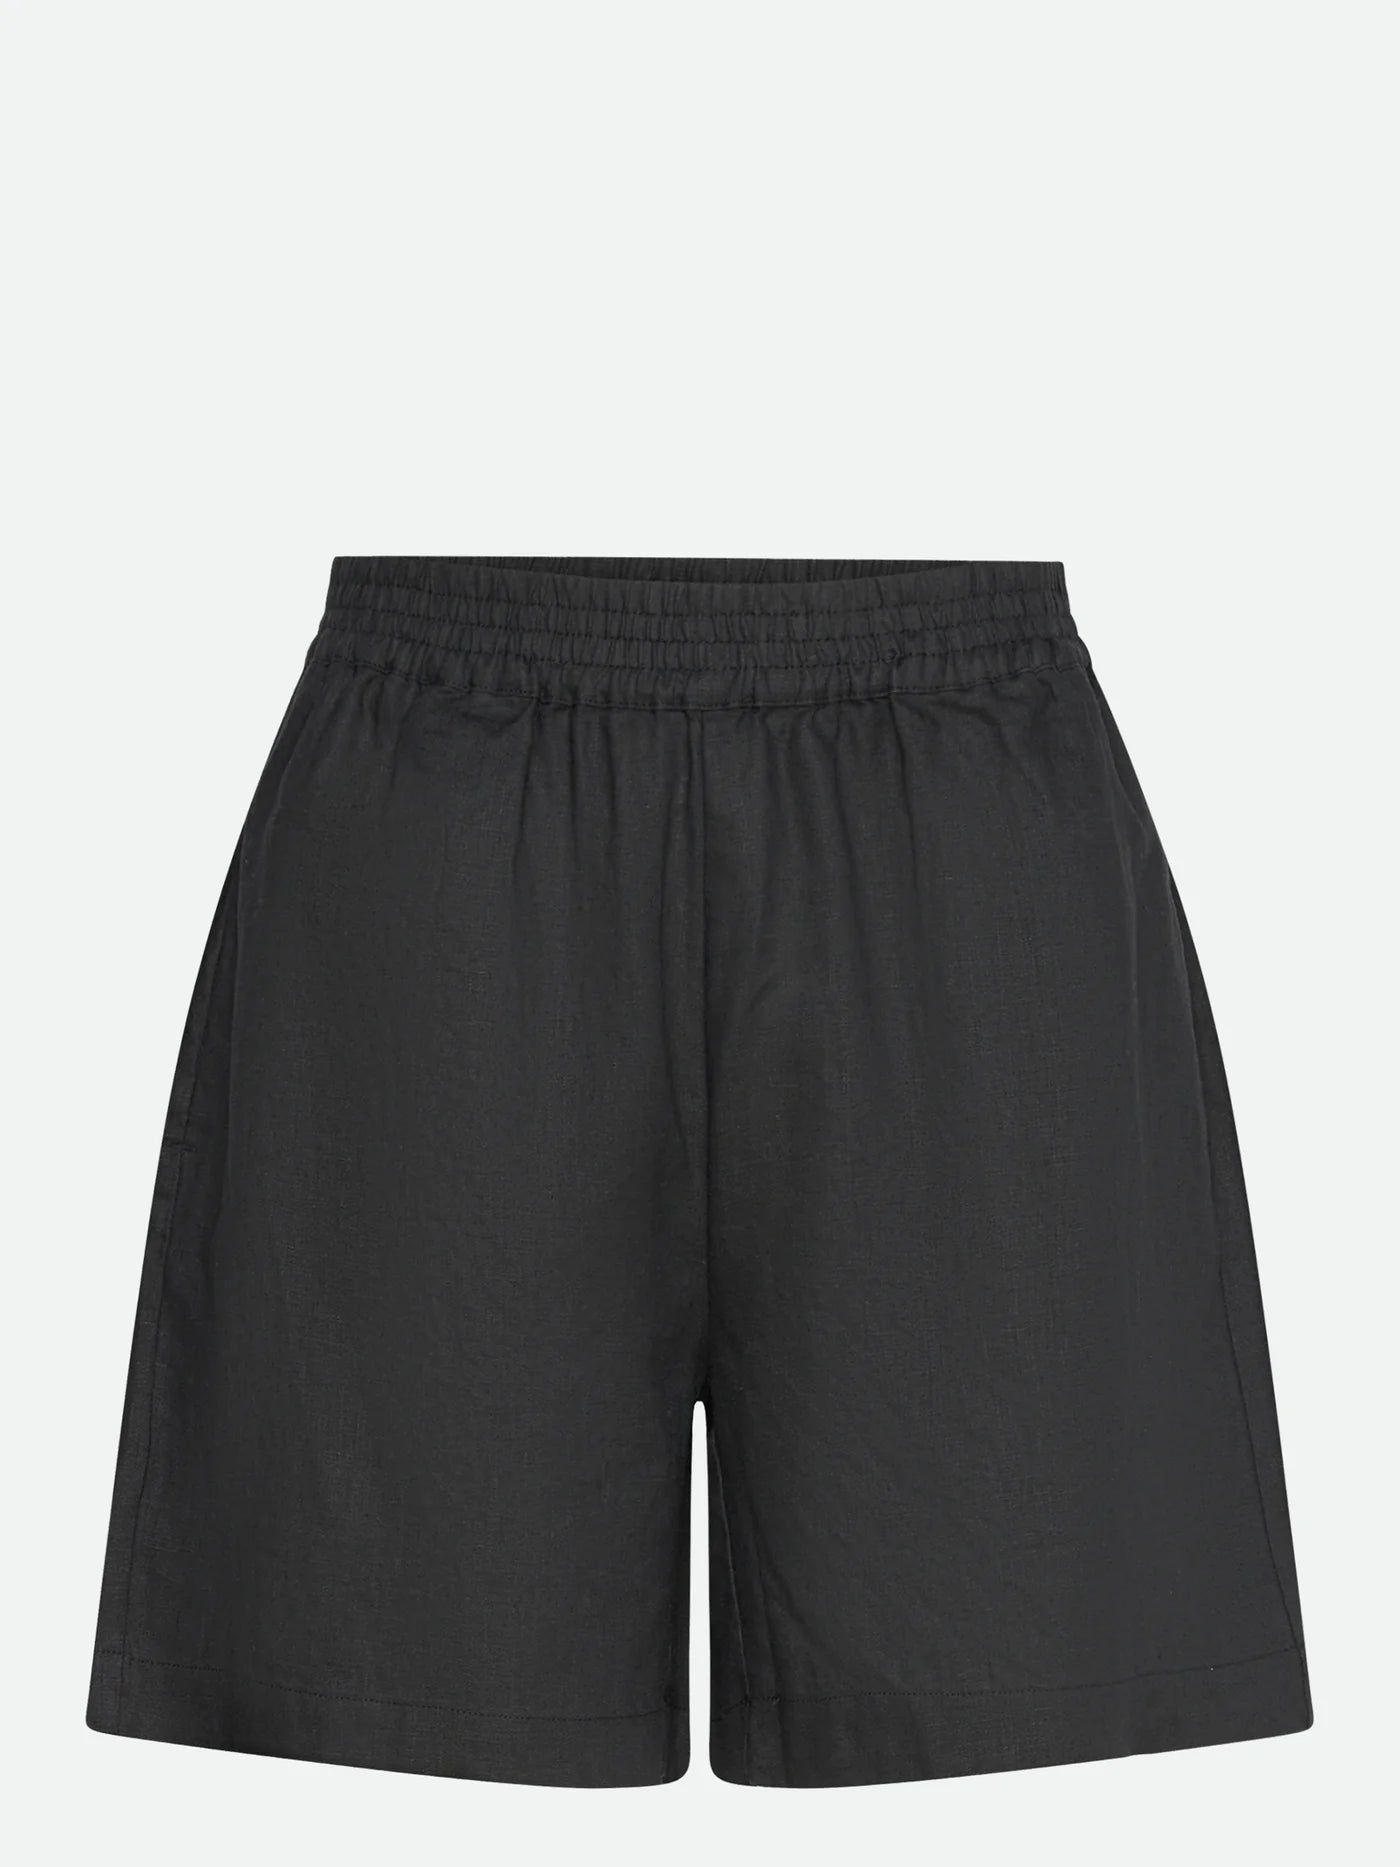 Rosemunde black linen shorts with an organic cotton elastic waistband, isolated on a white background.